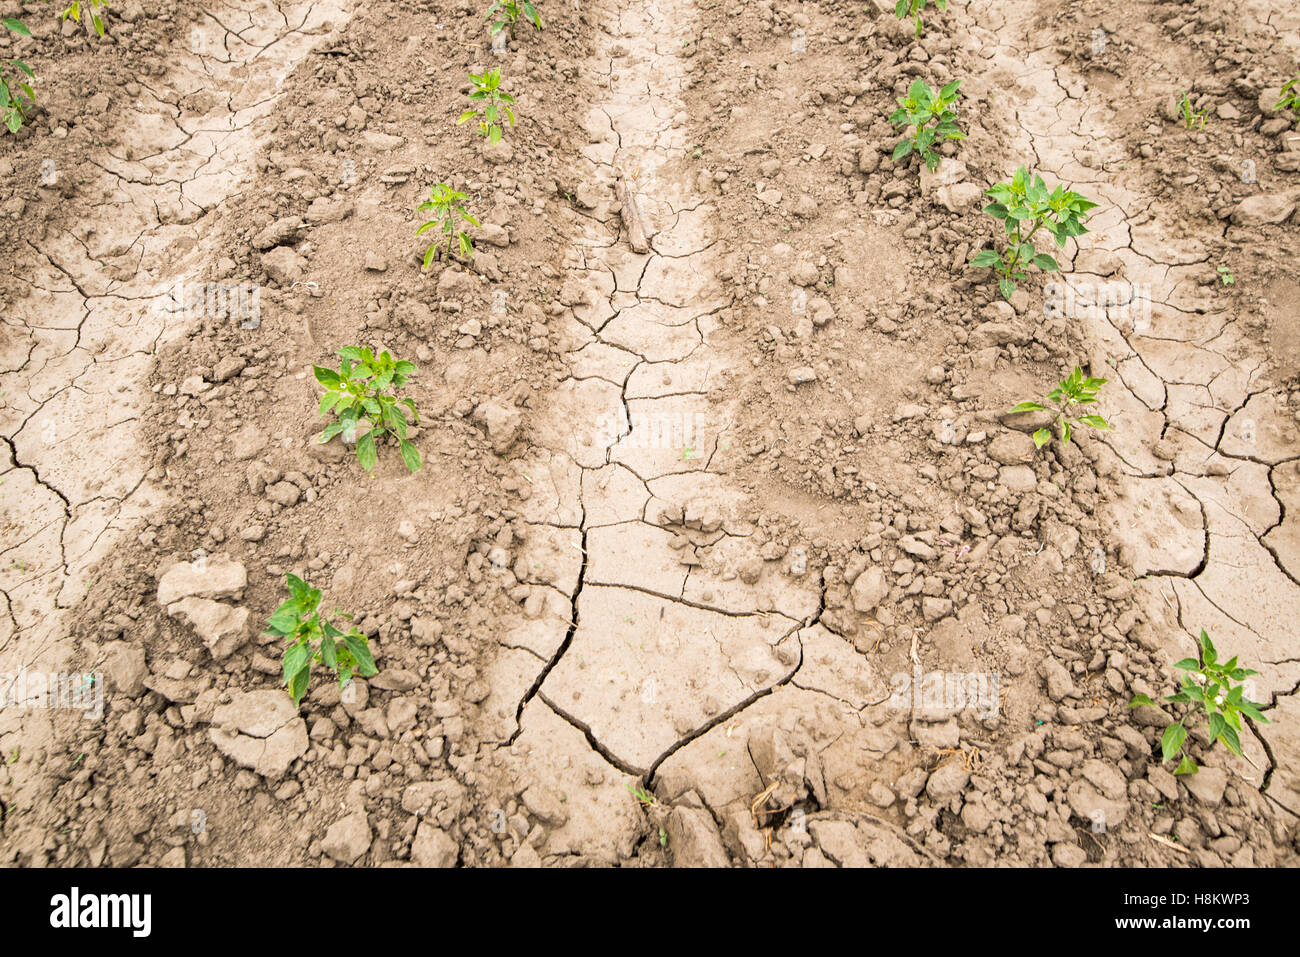 Meki Batu, Ethiopia - Young pepper plants growing in a dry cracked field at the Fruit and Vegetable Growers Cooperative in Meki  Stock Photo